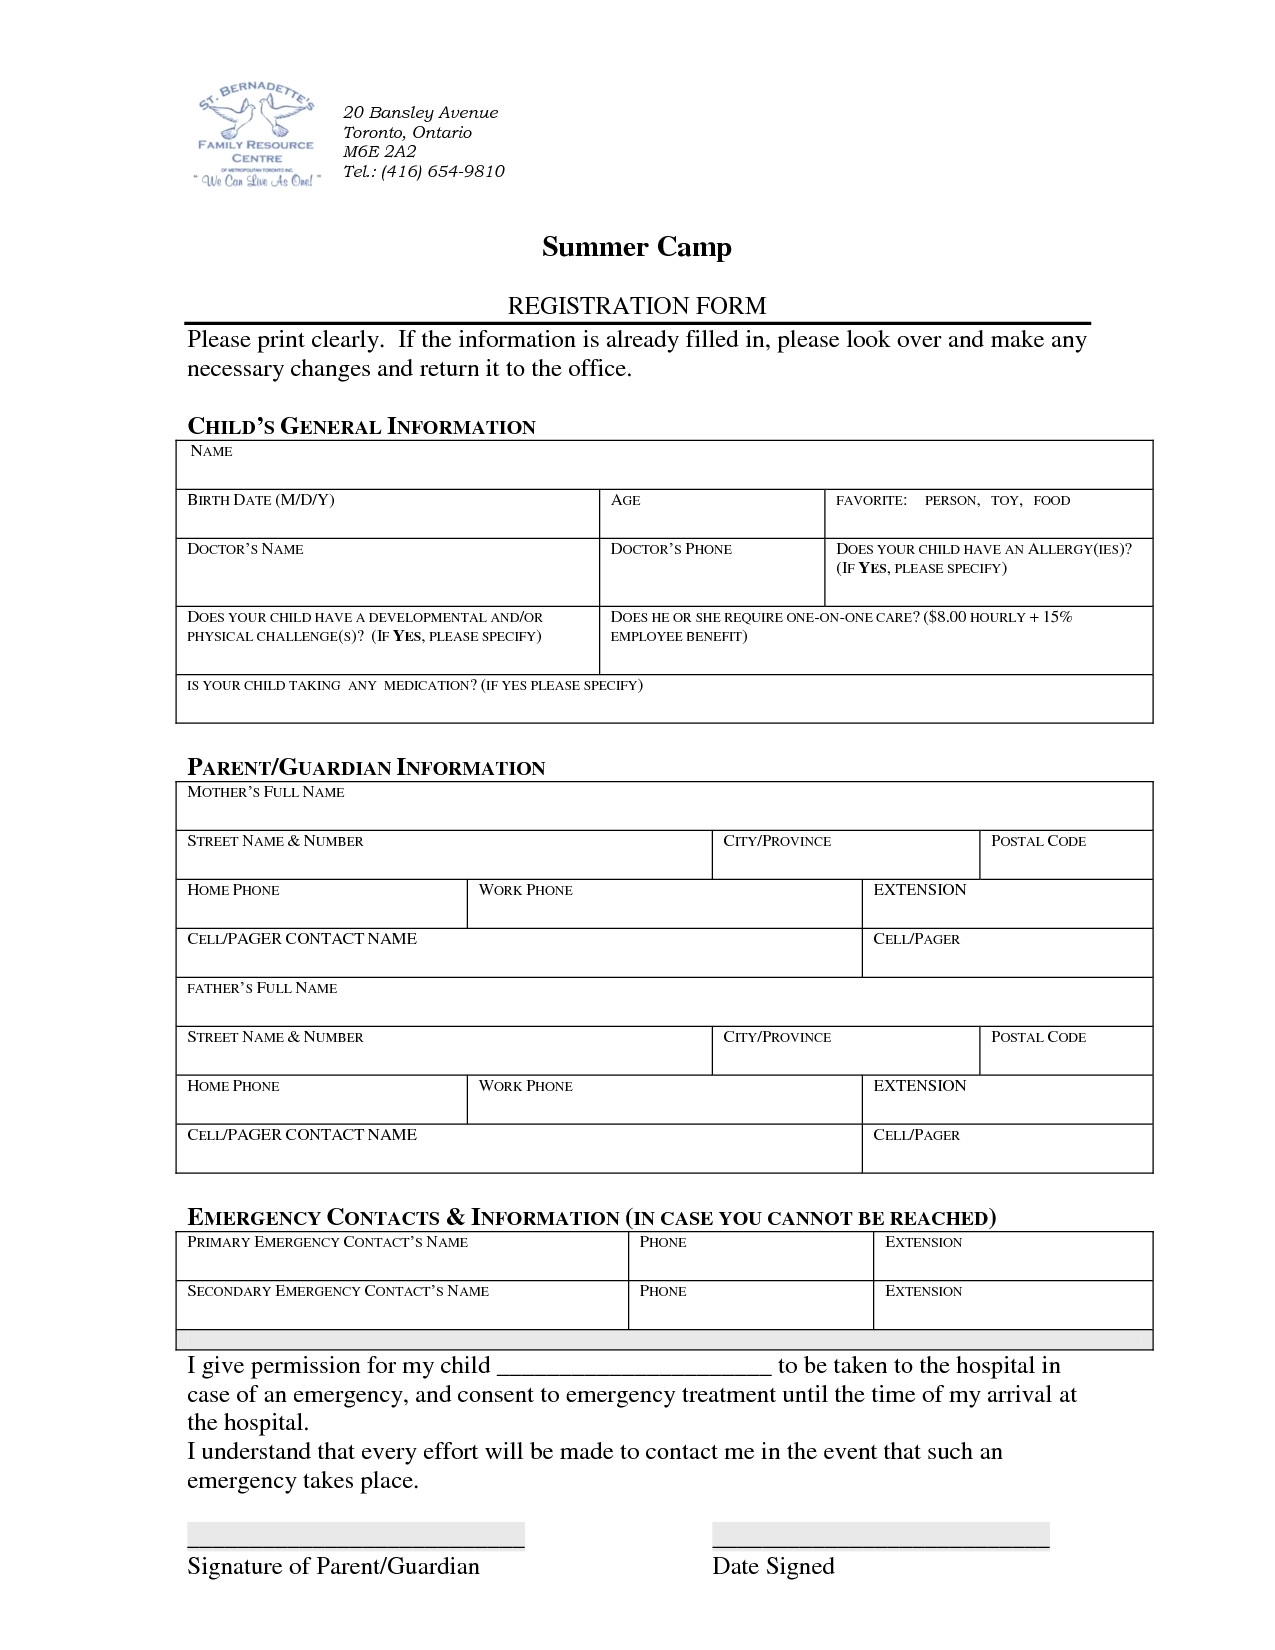 Registration Form Template Word | 4Gwifi  Free Download Blank Summer Camp Application